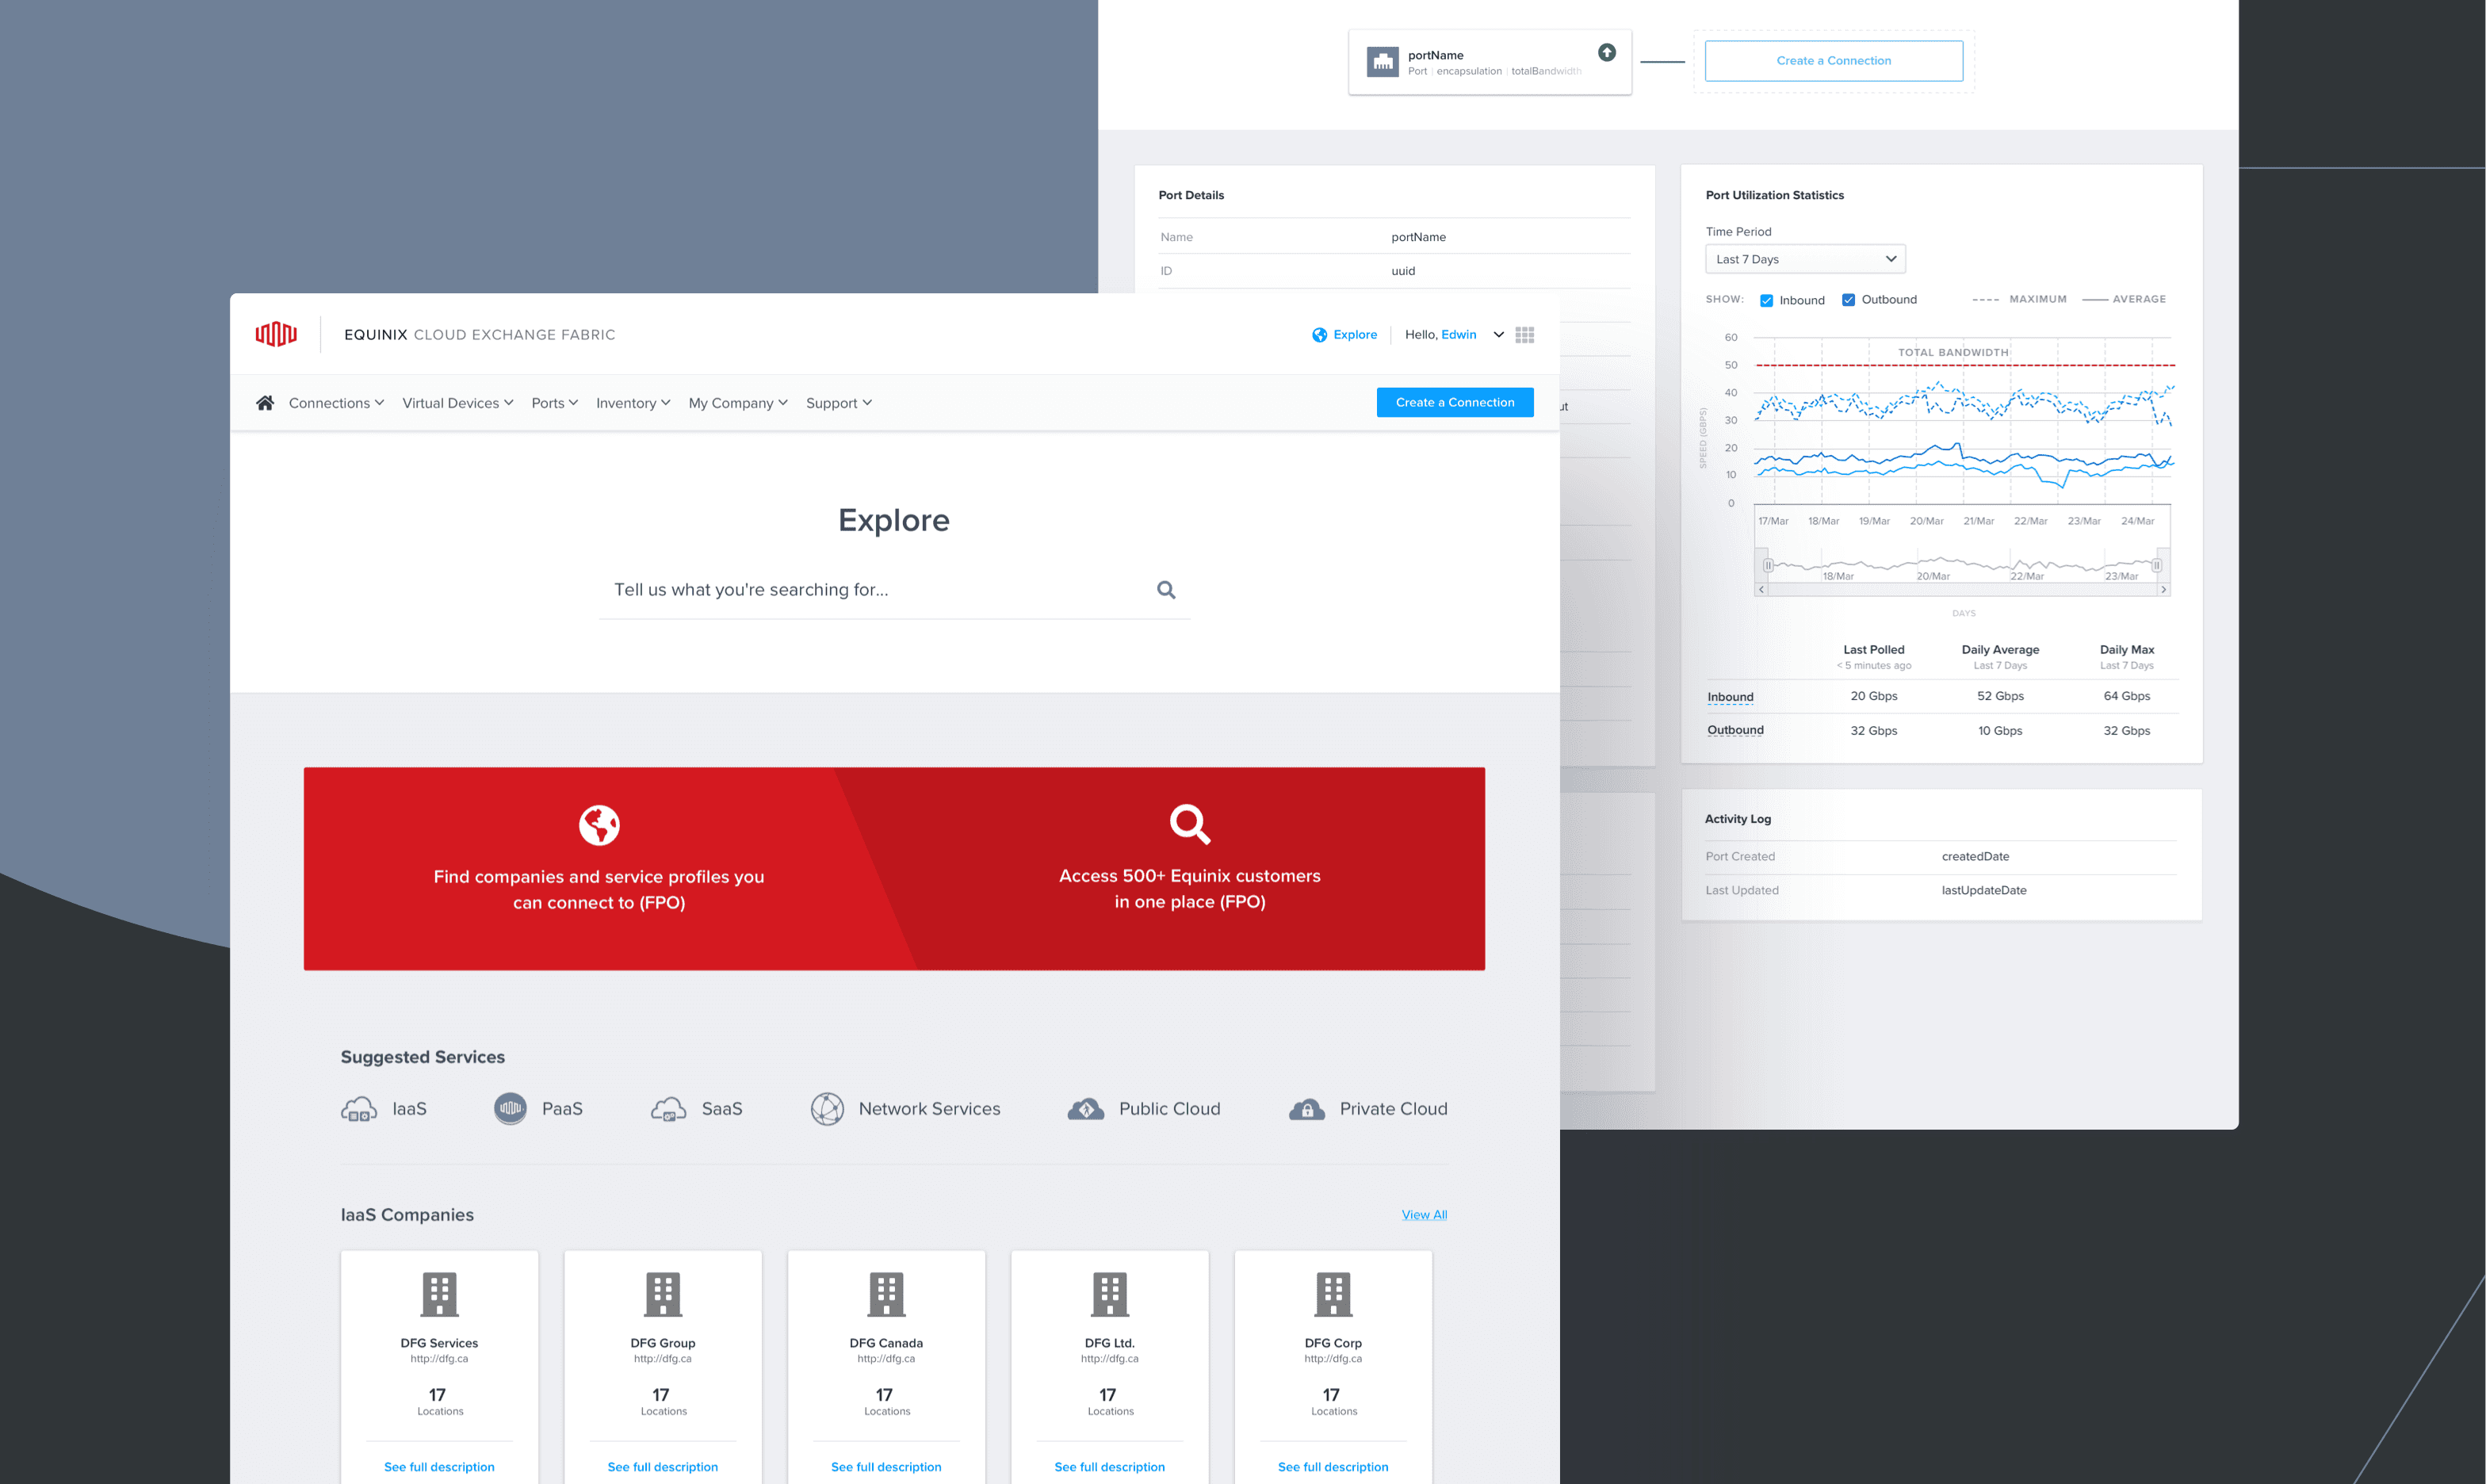 Screenshots of Equinix's Cloud Exchange Fabric system focused on UX and back-end portal management.